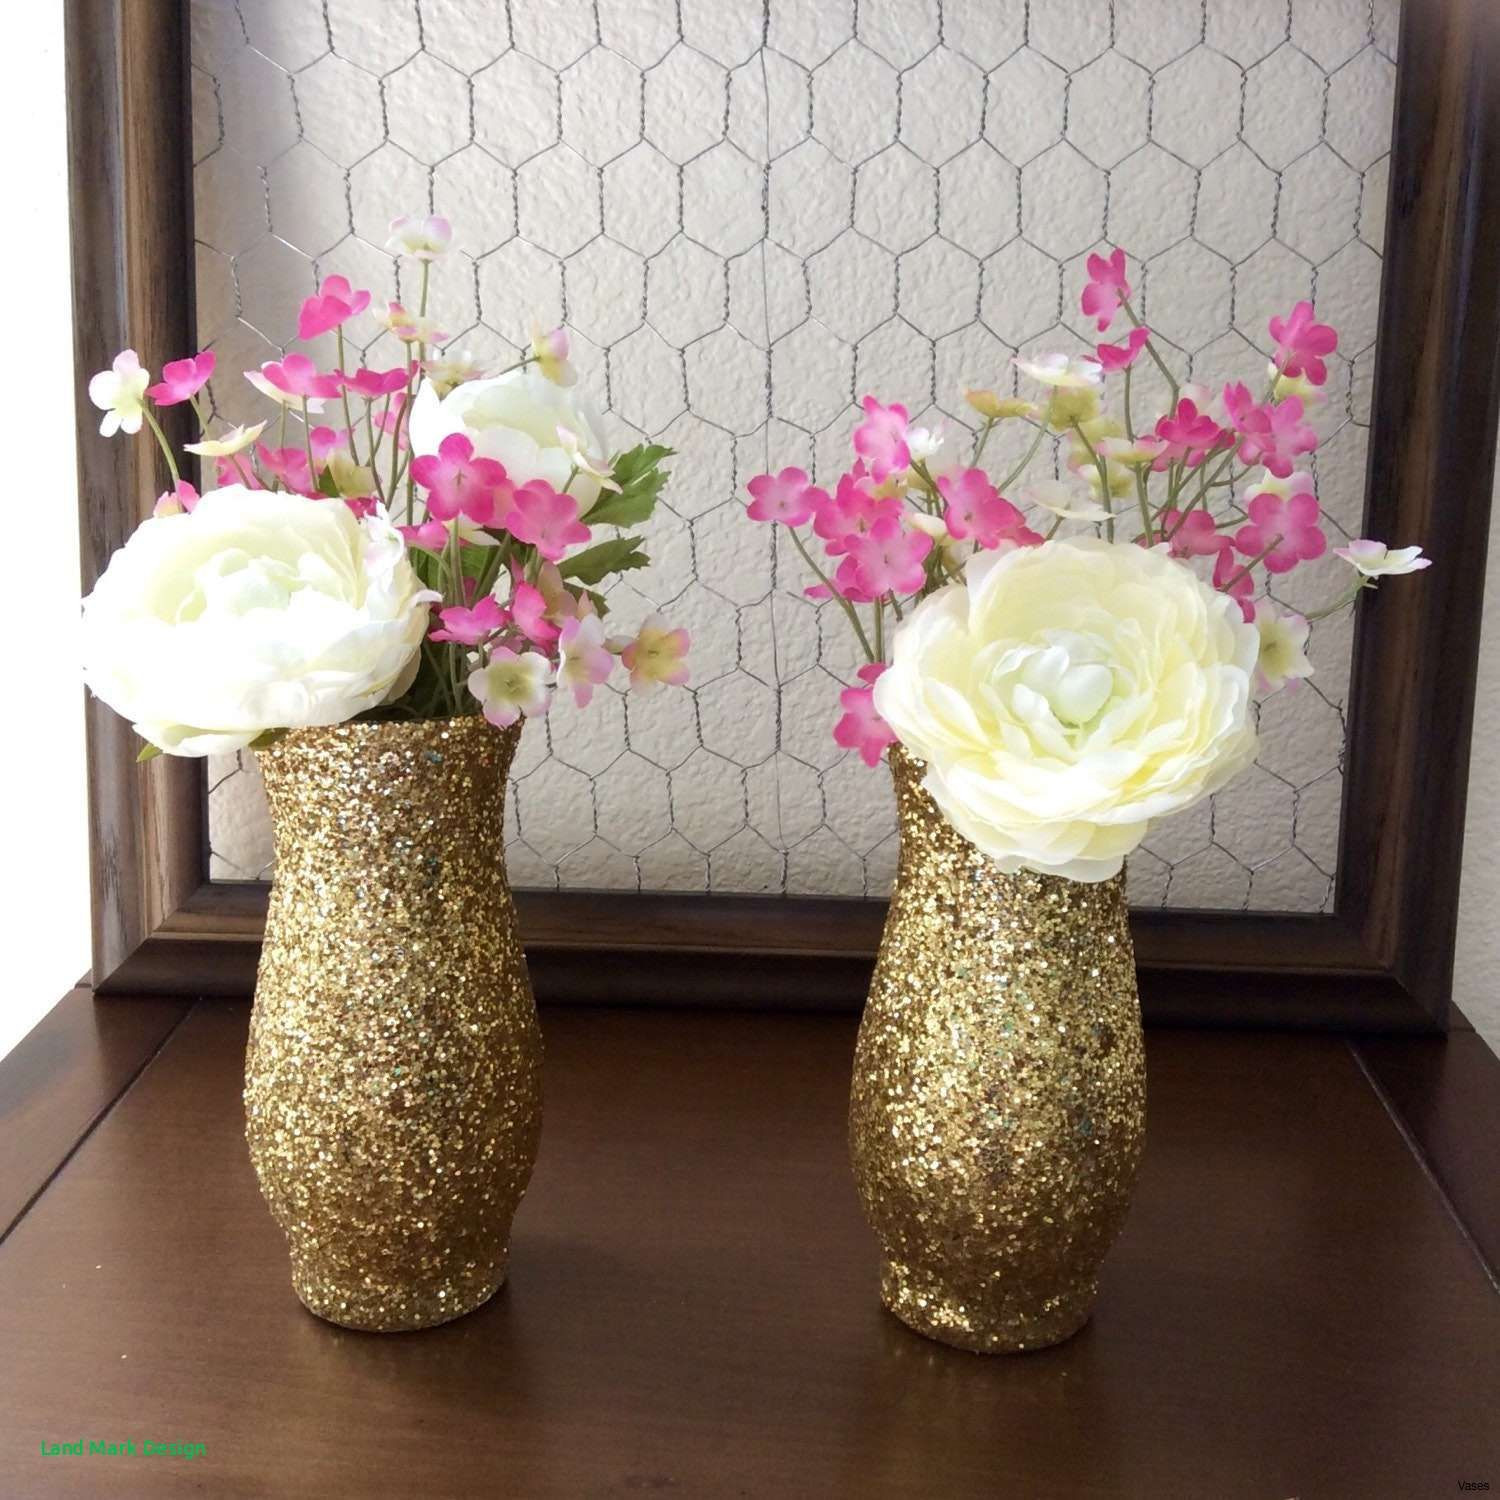 24 Fashionable Gold Glass Vases wholesale 2024 free download gold glass vases wholesale of 19 gold flower vases the weekly world within il fullxfull 3b2bh vases gold glitter vase set of 10 wedding by i 8d via ydeevnepropecia com